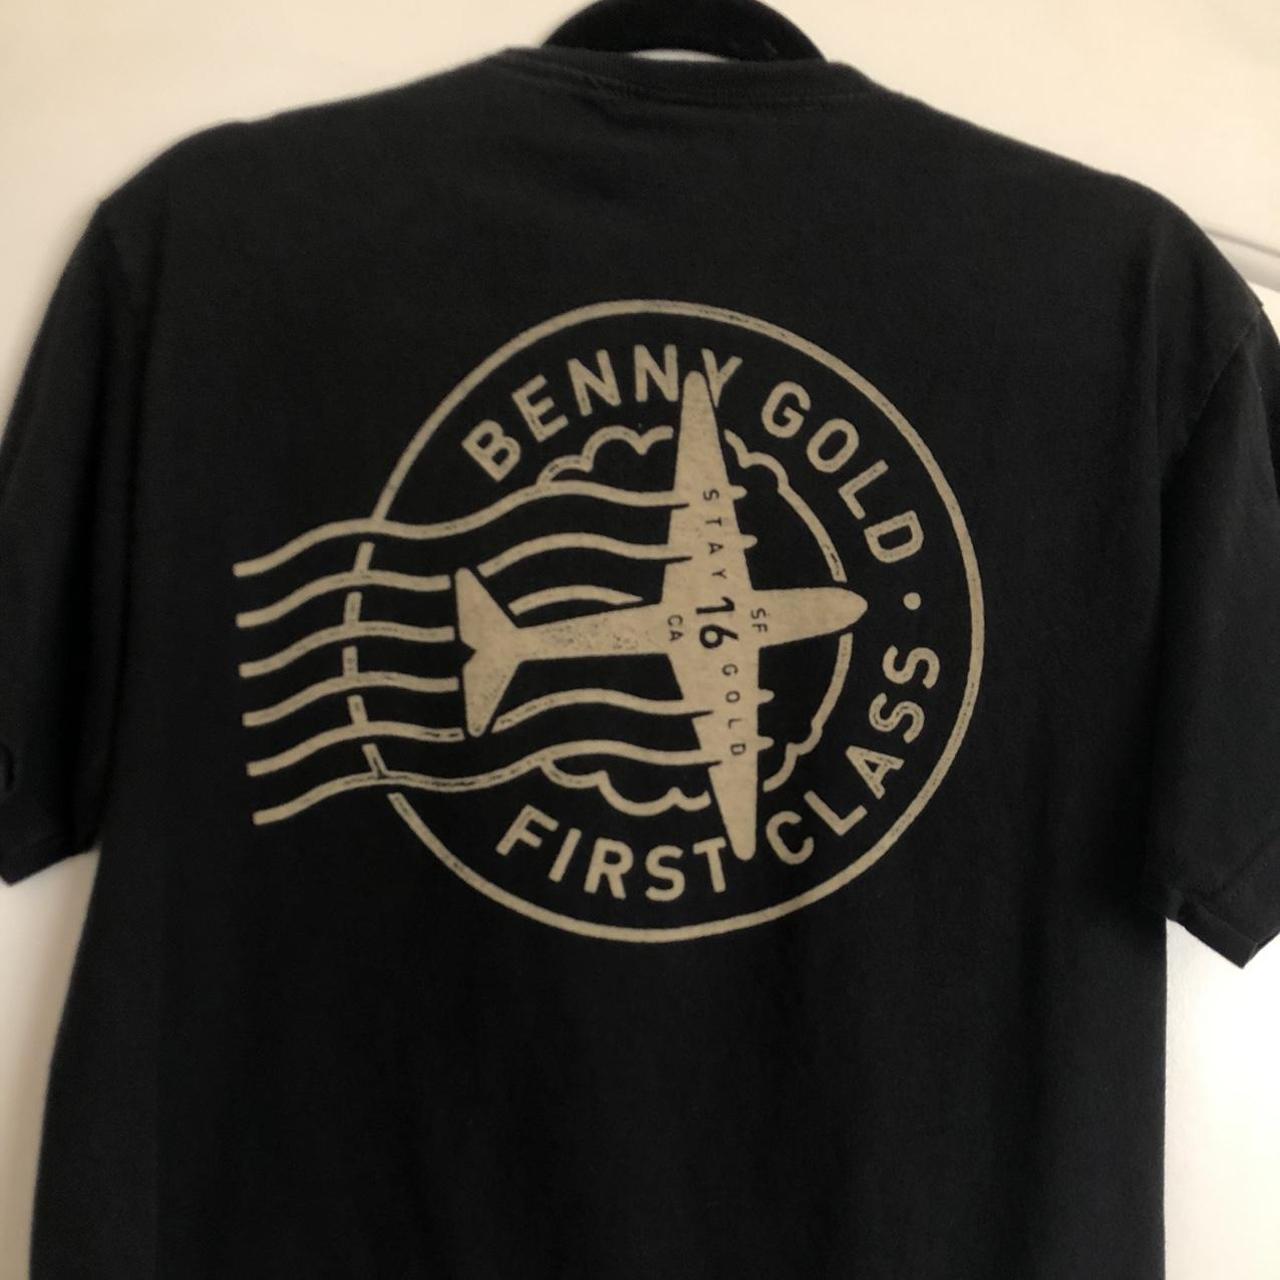 Benny Gold T-Shirt. In great shape, wore couple... Depop